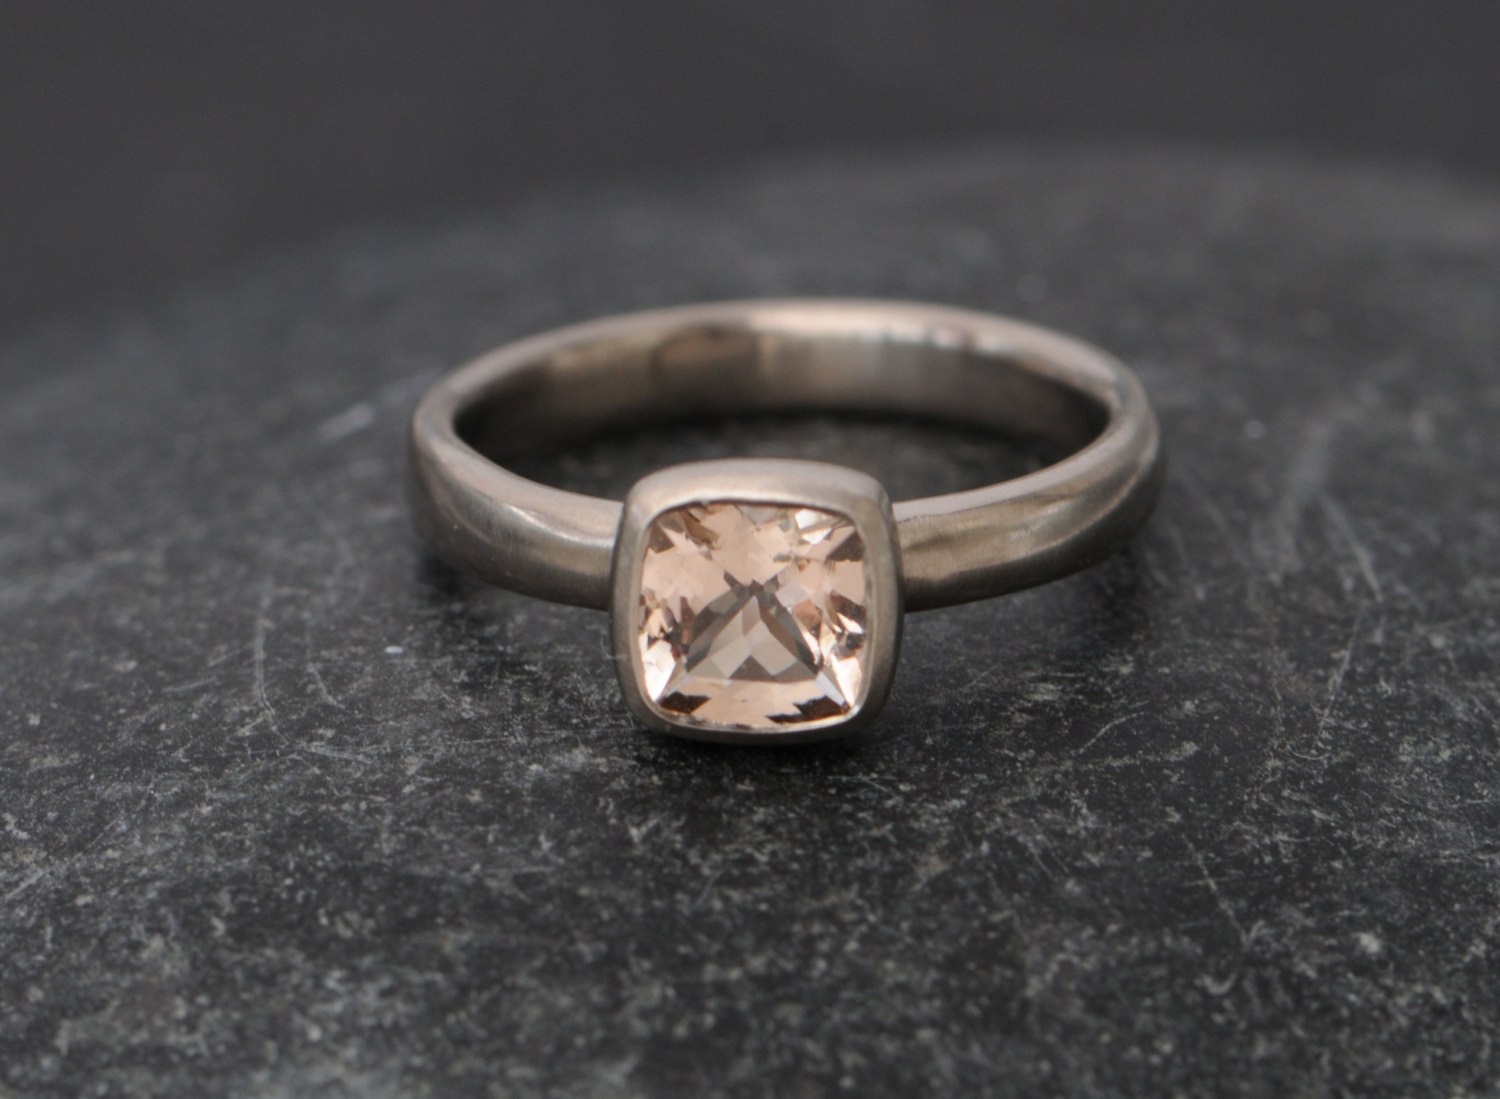 Pale pink morganite set in 18k white gold ring, by William White